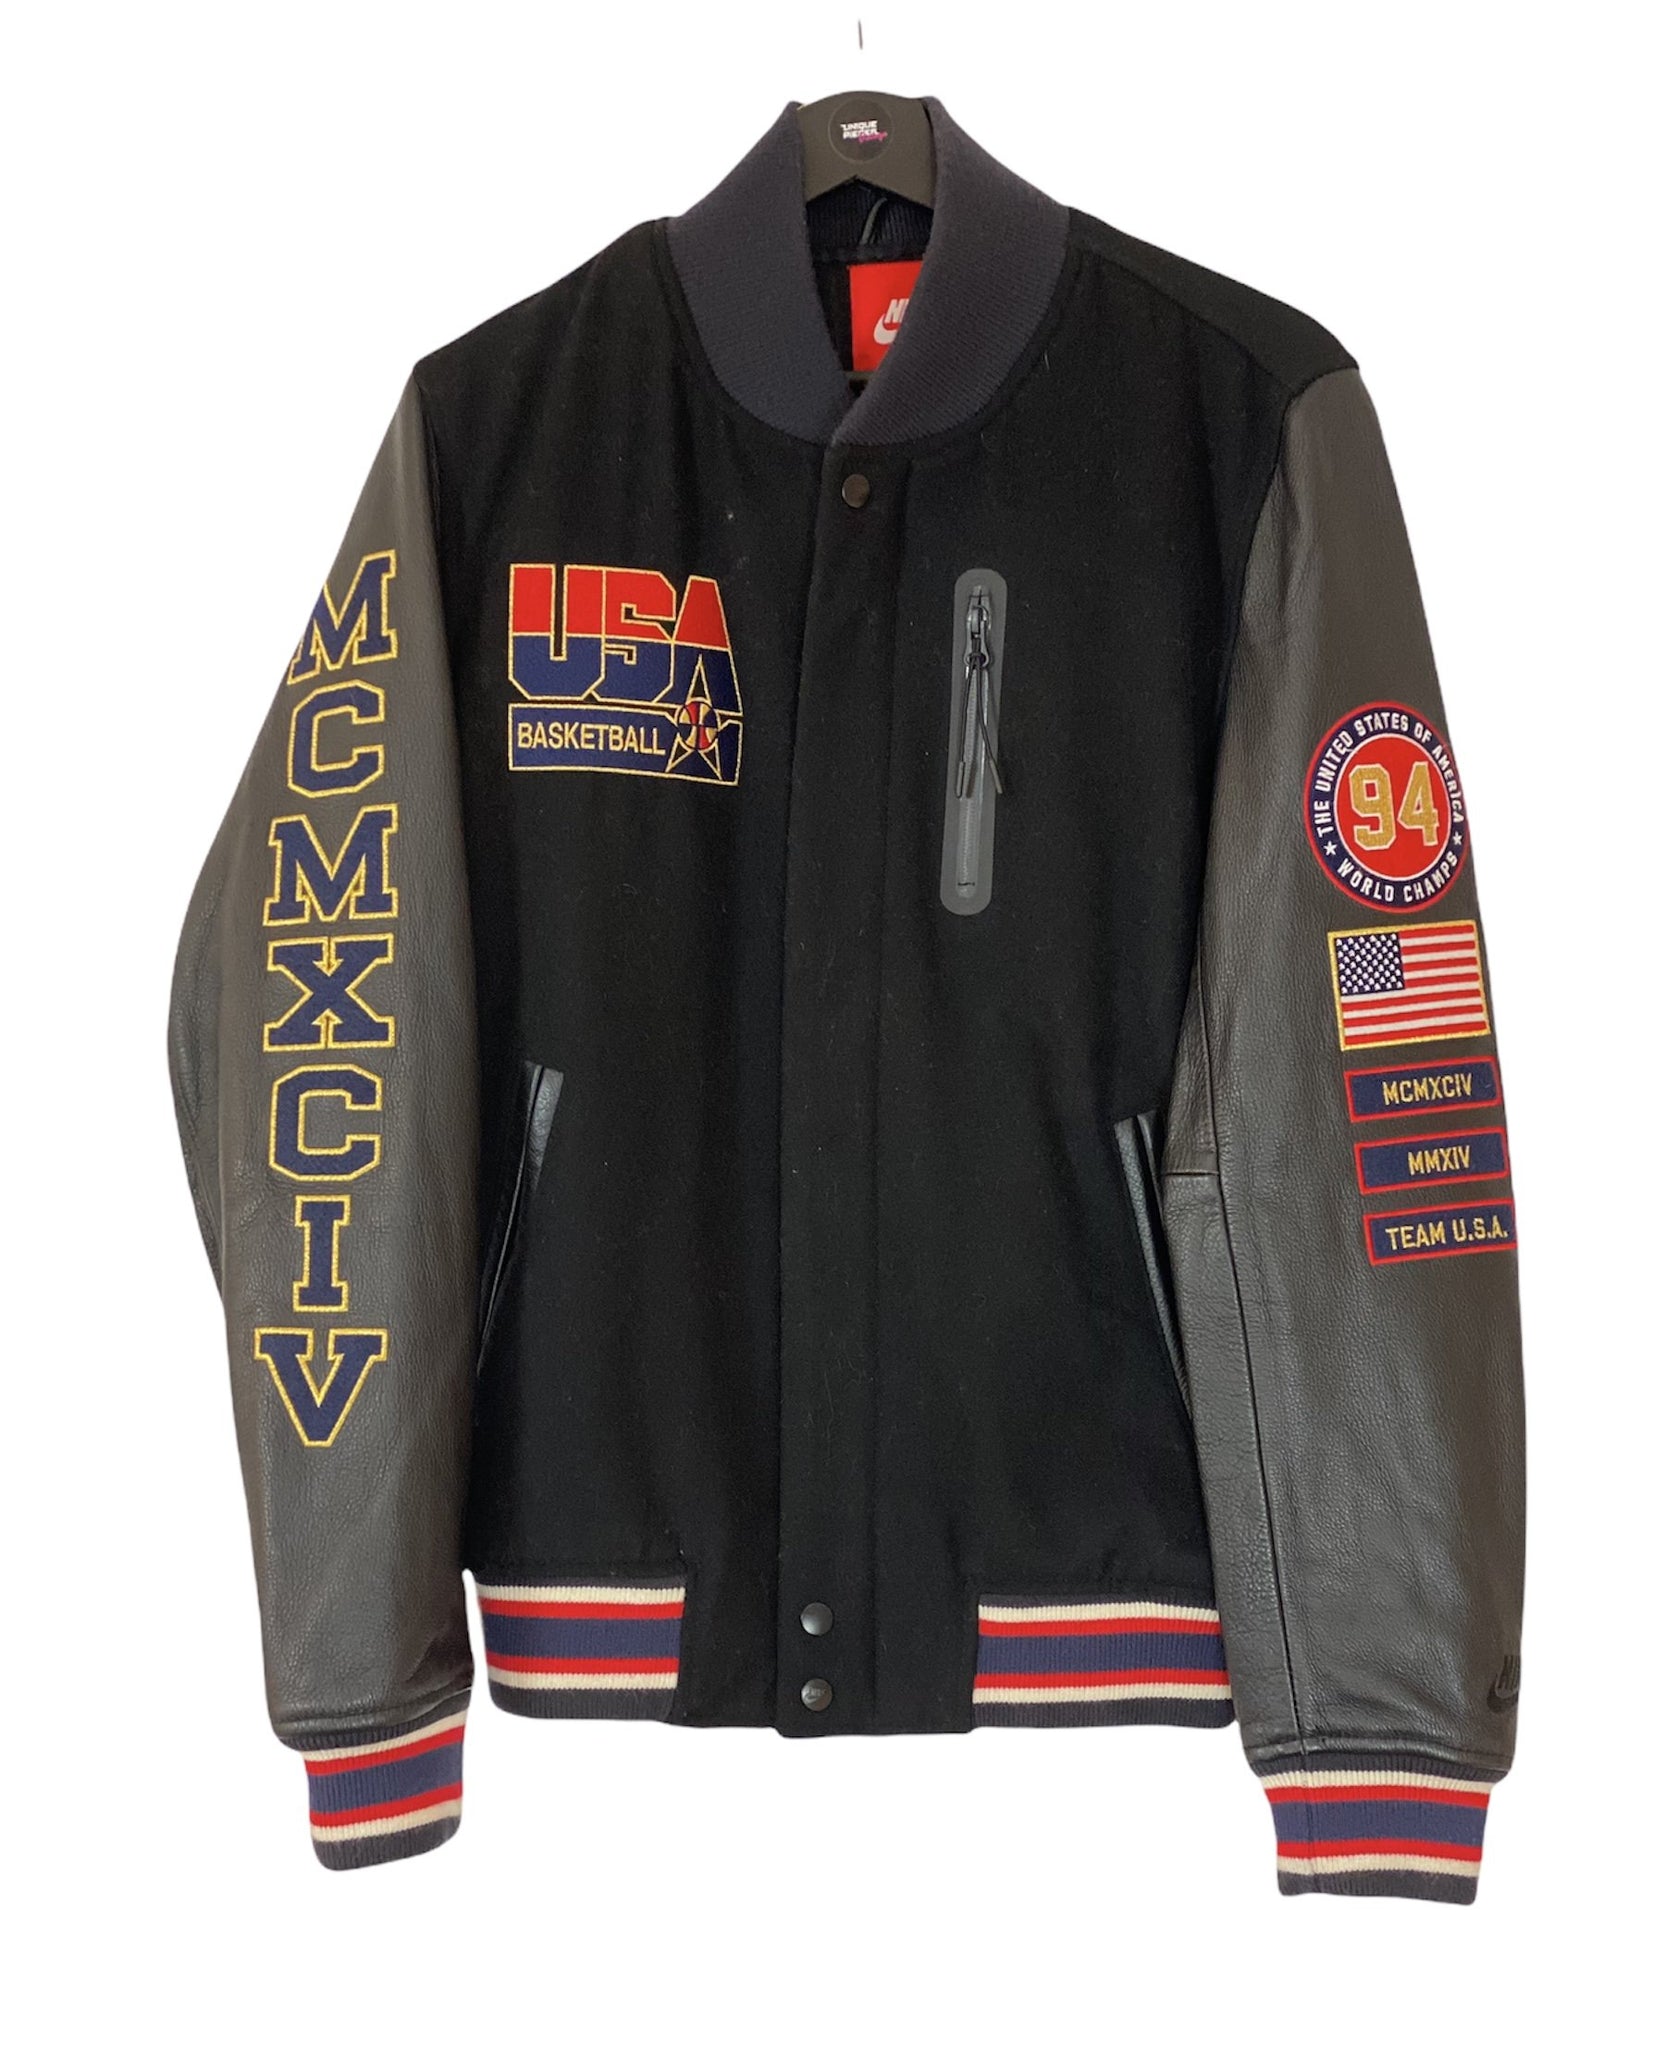 Nike Destroyer Leather Jacket USA Dream Team Olympic Black Size Small freeshipping - Unique Pieces Vintage